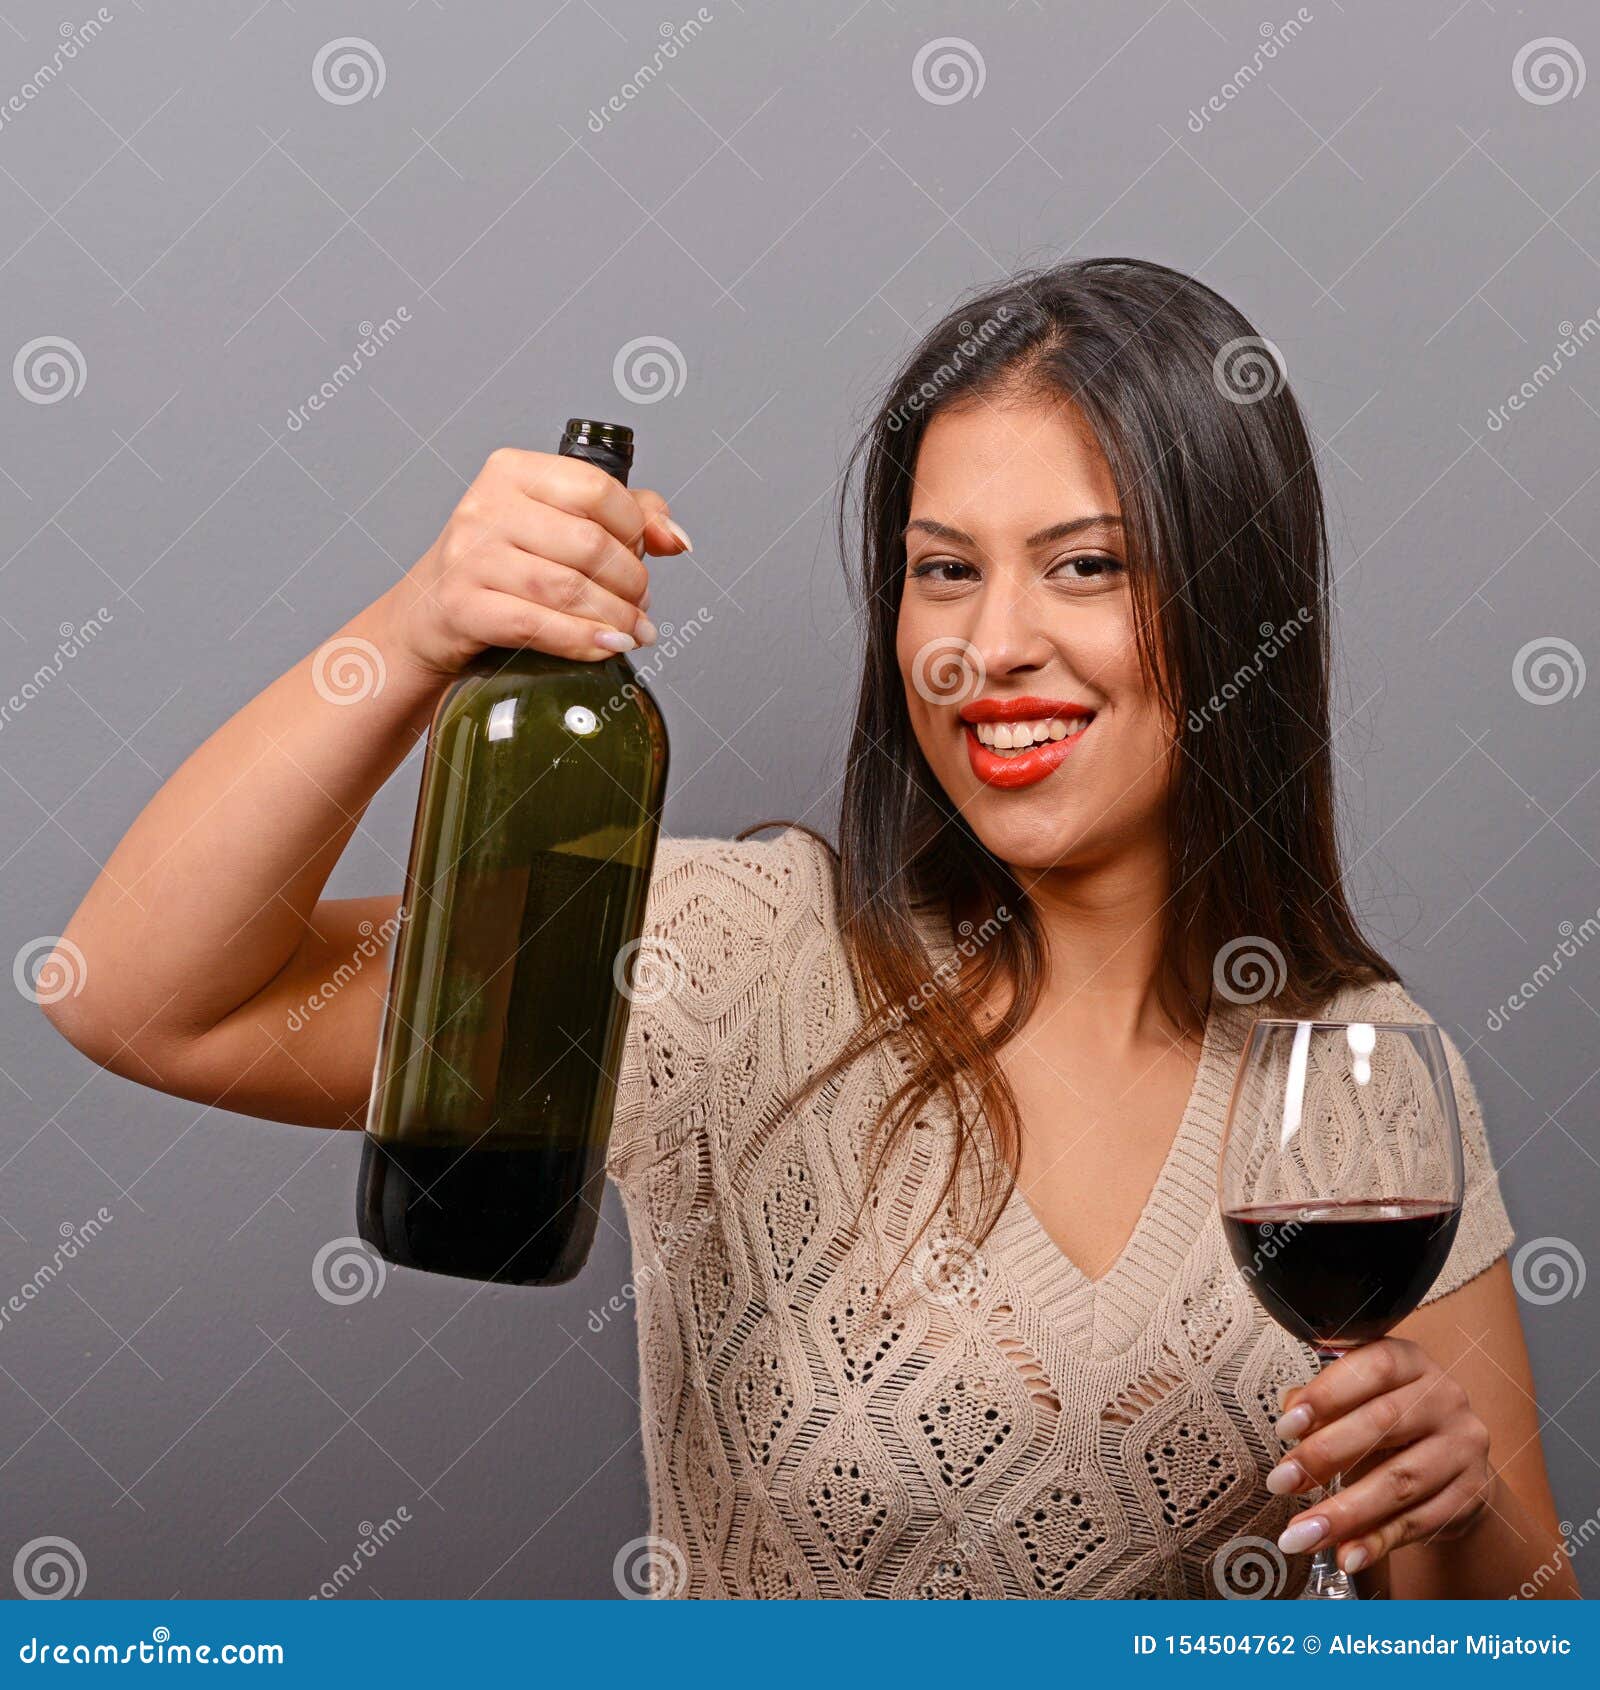 Portrait Of Woman Holding Wine Bottle And Glass Against Gray Background